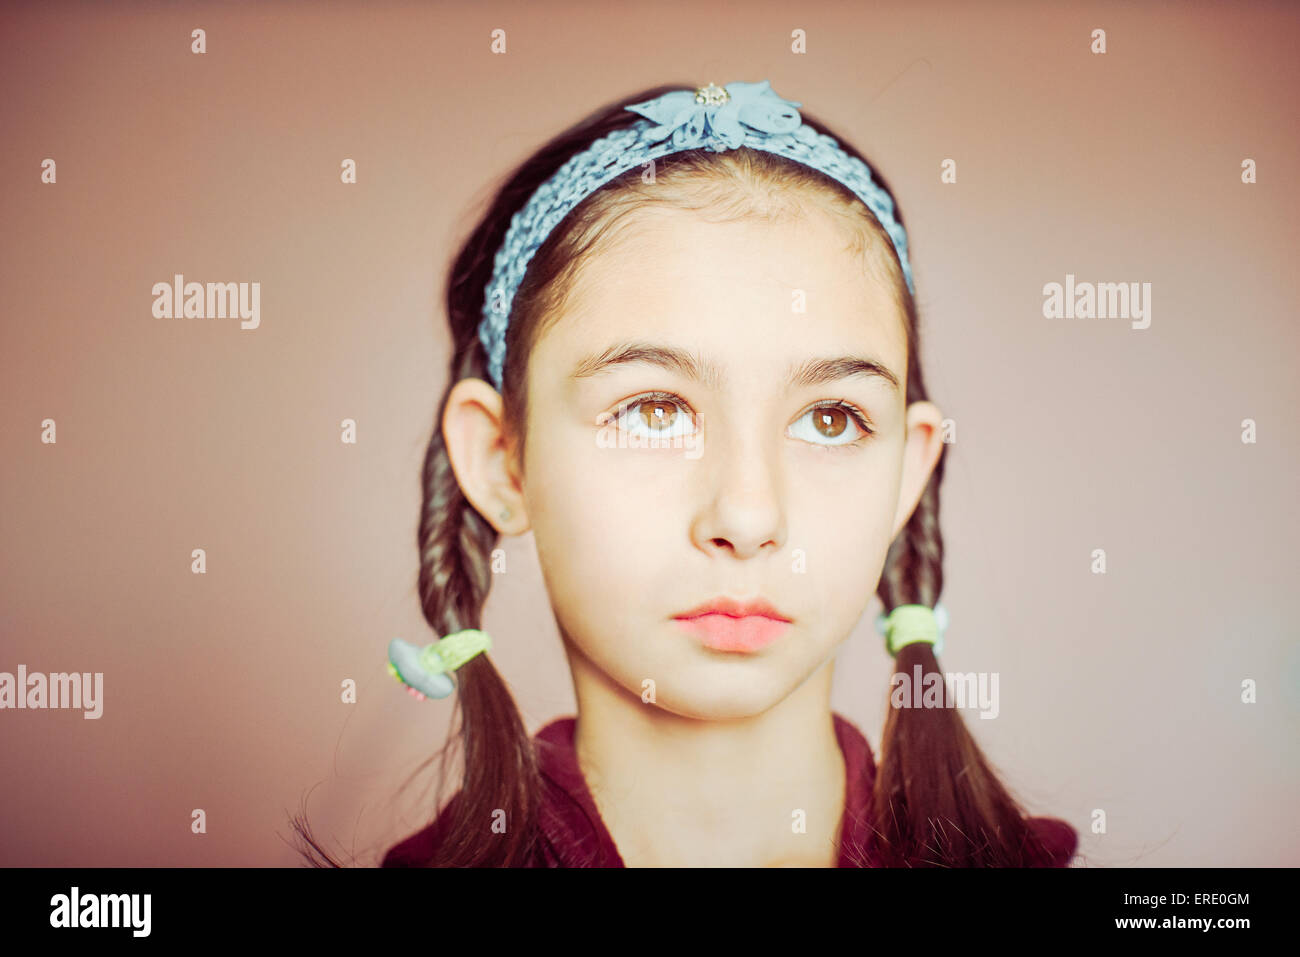 Mixed race girl wearing braid pigtails Stock Photo